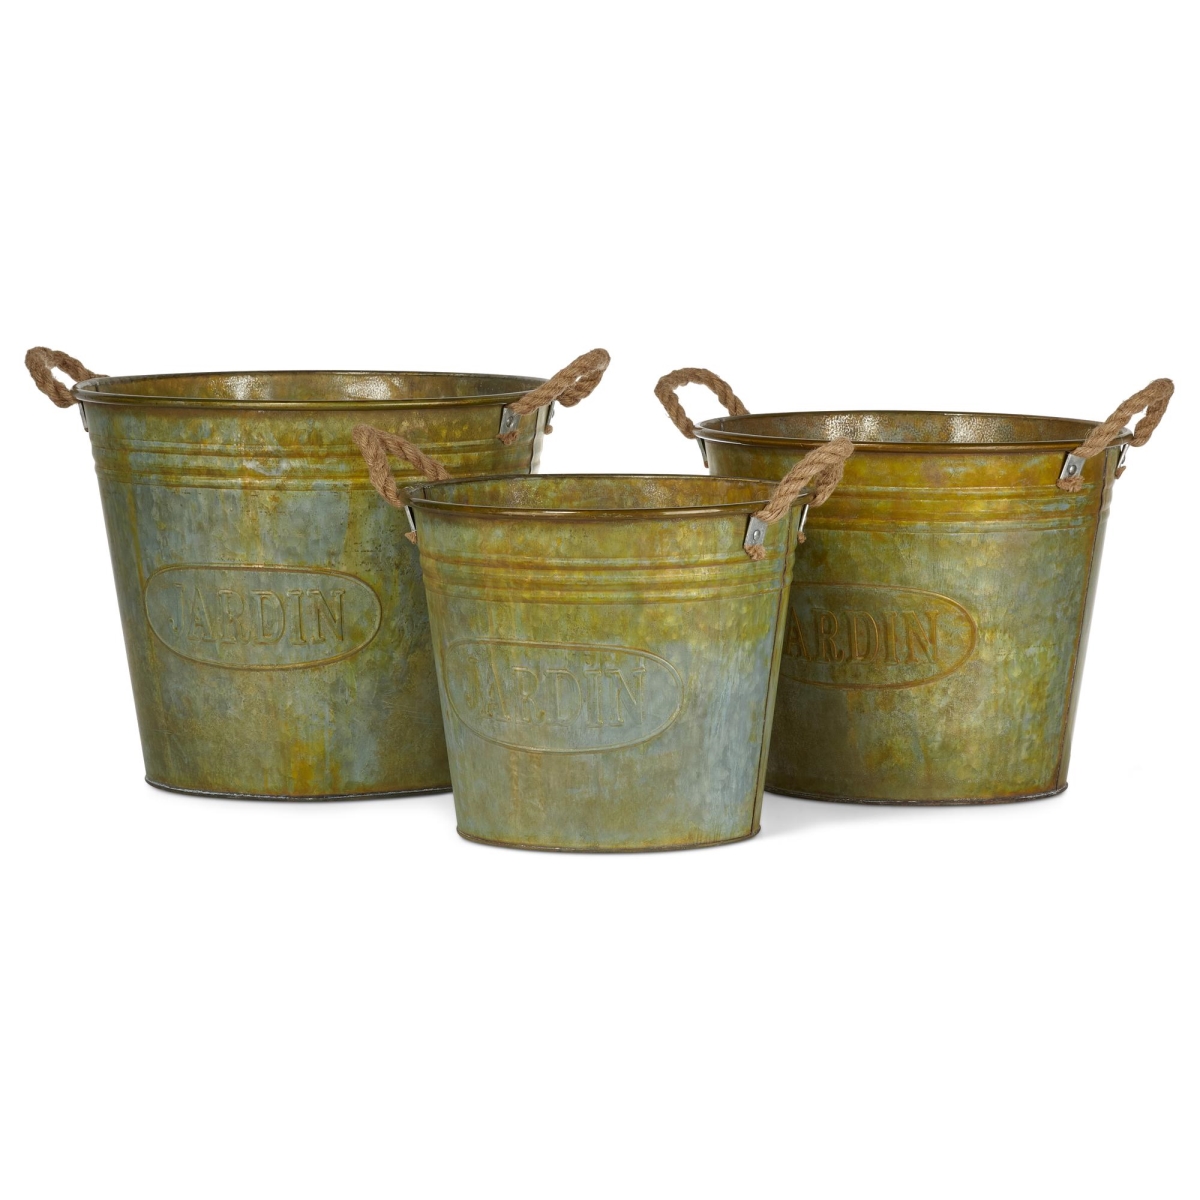 Imax Z27816-3 Walther Galvanized Planters With Rusted Finish - Green, Set Of 3